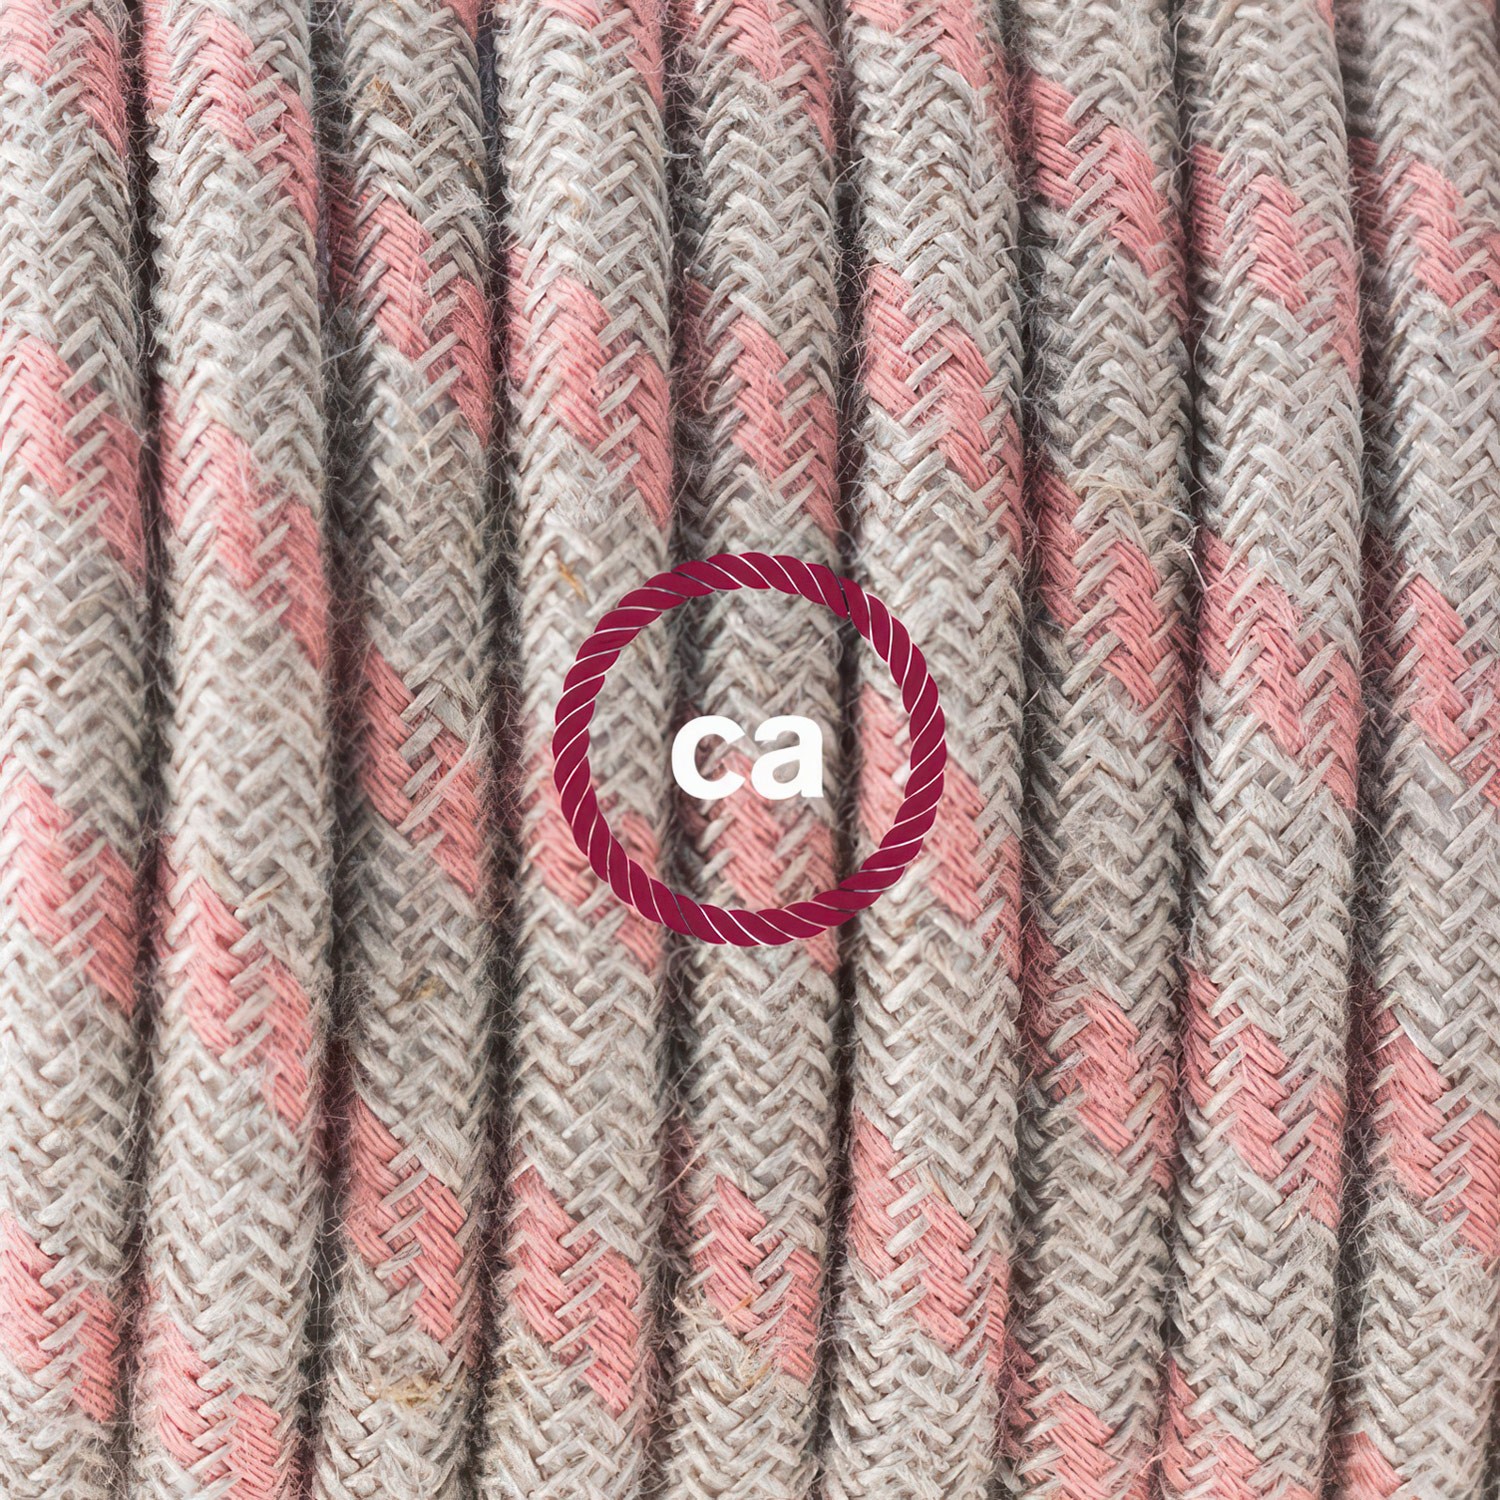 Lamp wiring, RD51 Ancient Pink Stripes Cotton and Natural Linen 1,80 m. Choose the colour of the switch and plug.